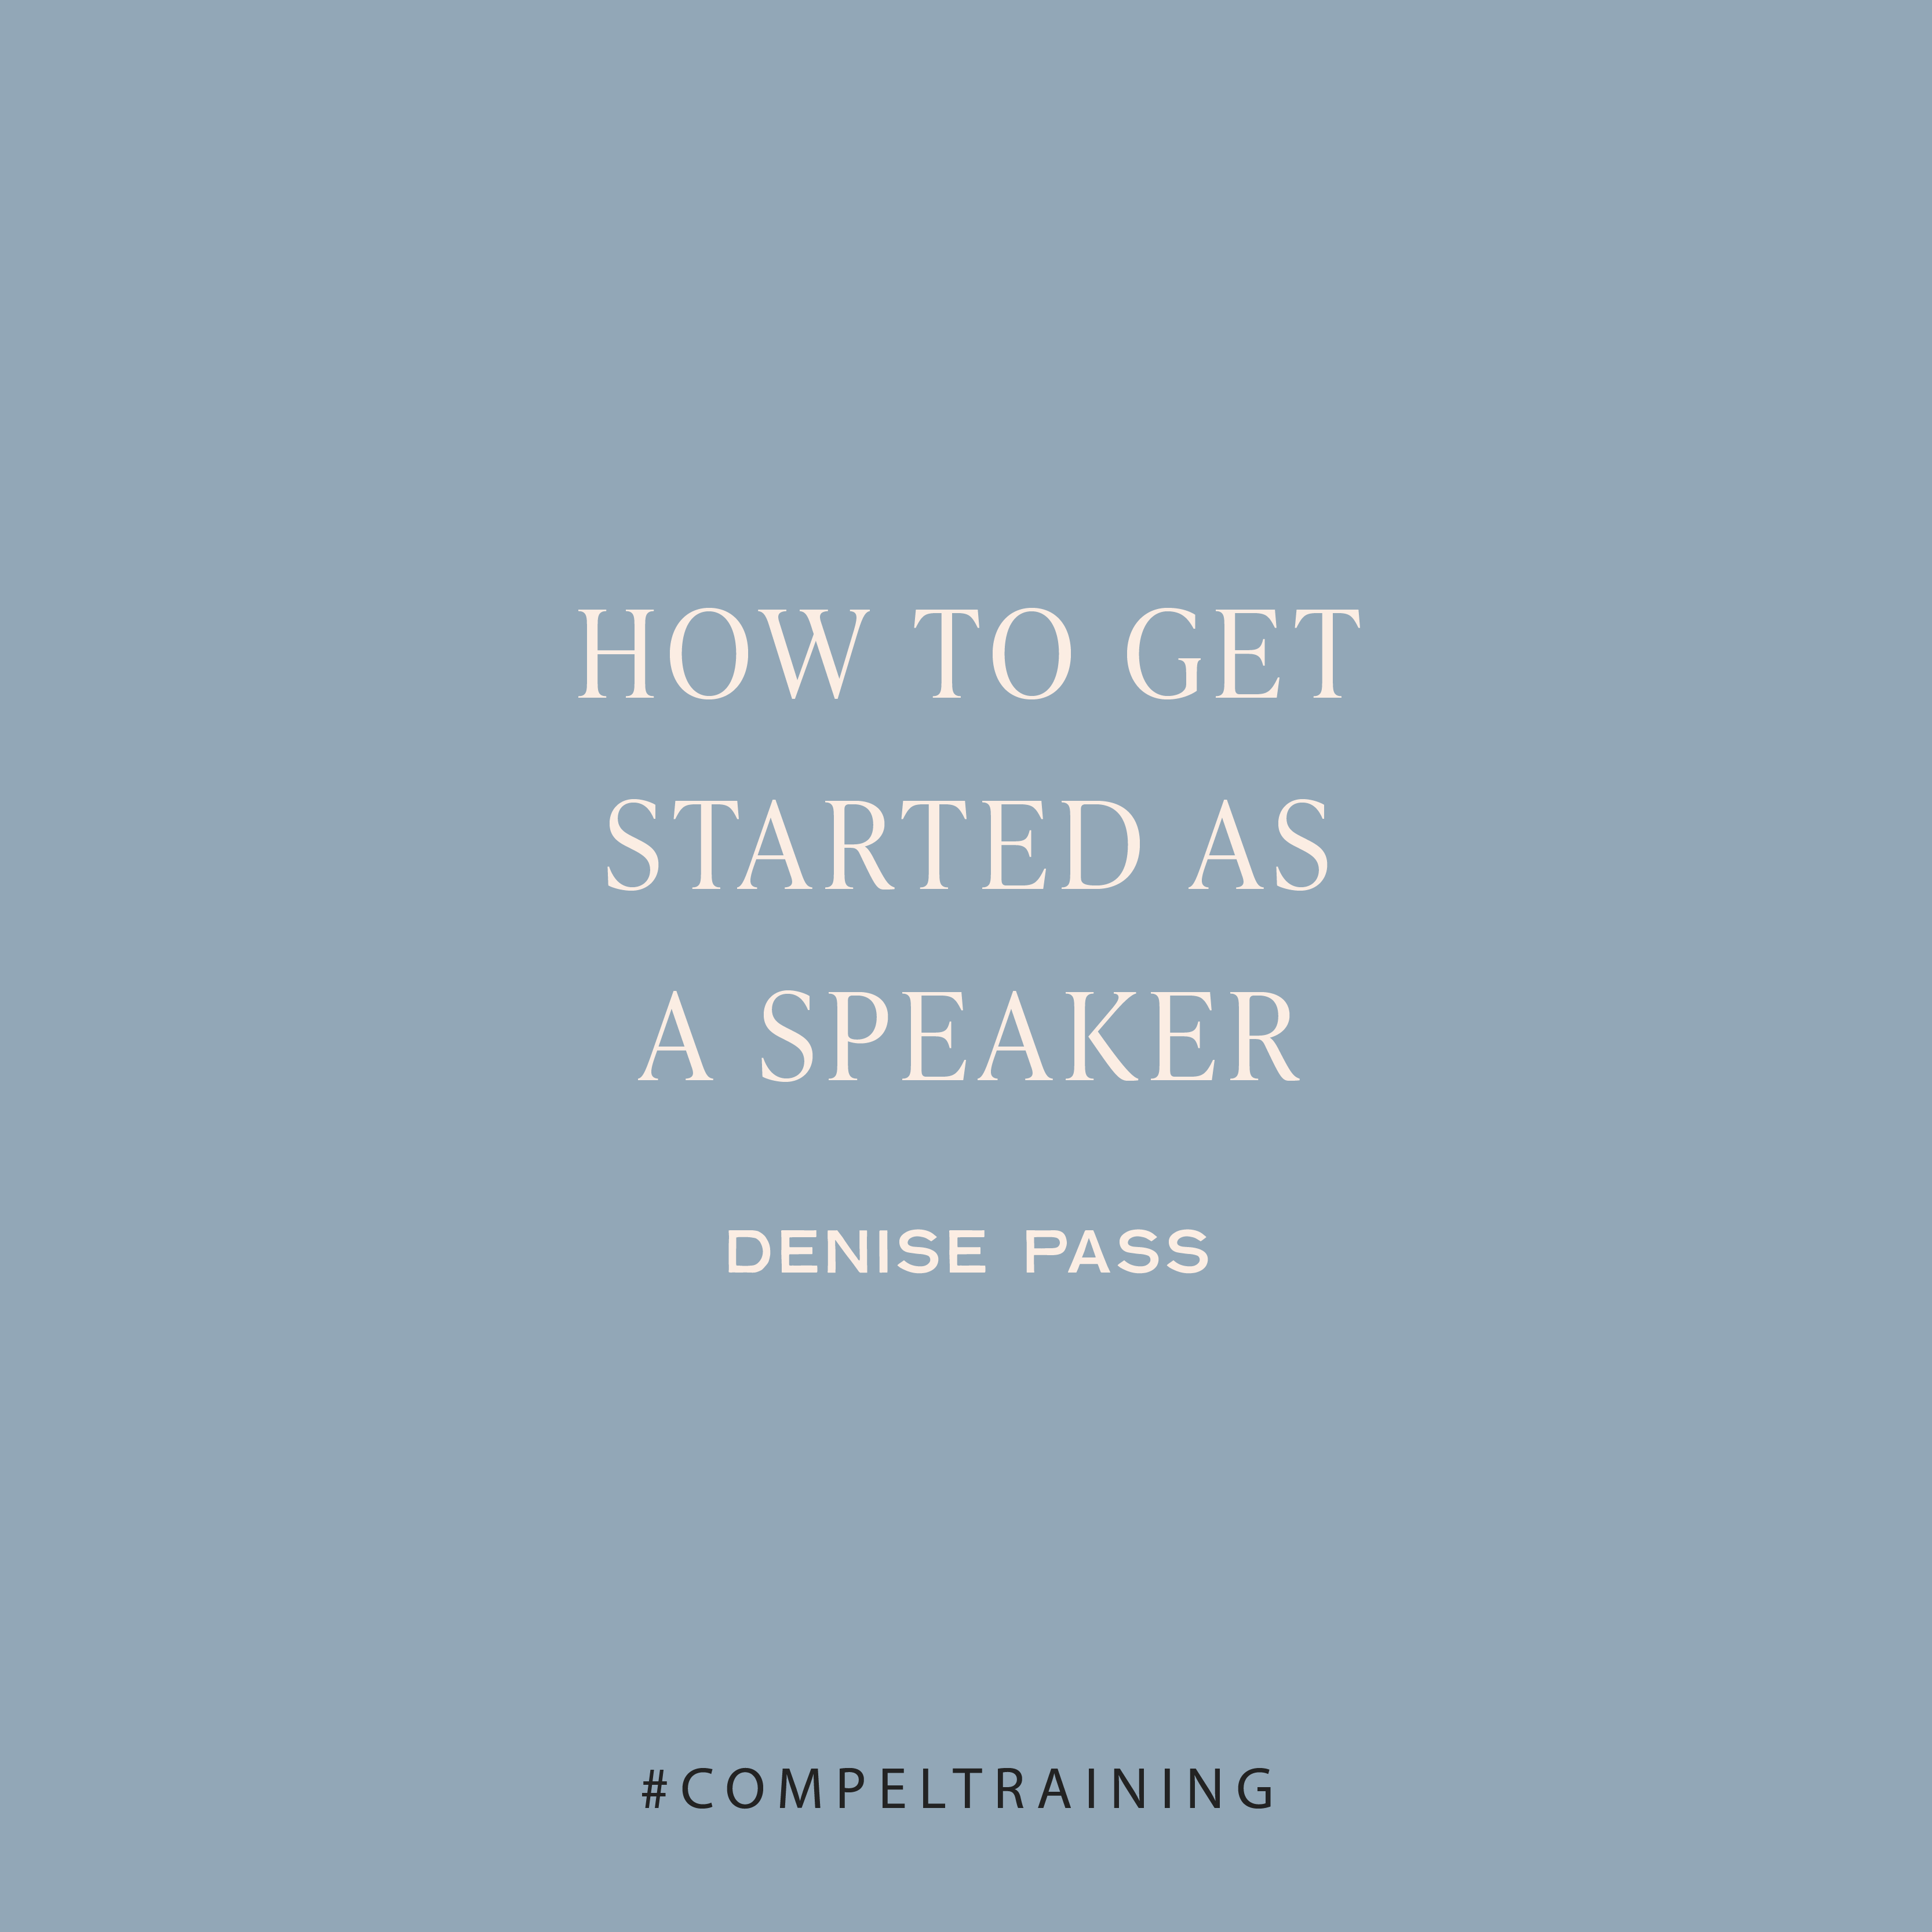 Do you have a desire to become a speaker? Getting started can be overwhelming and scary. You won’t want to miss this advice from seasoned speaker Denise Pass! Here are some of her best tips that have helped her grow her speaking ministry and speak at women’s events and conferences across the nation.